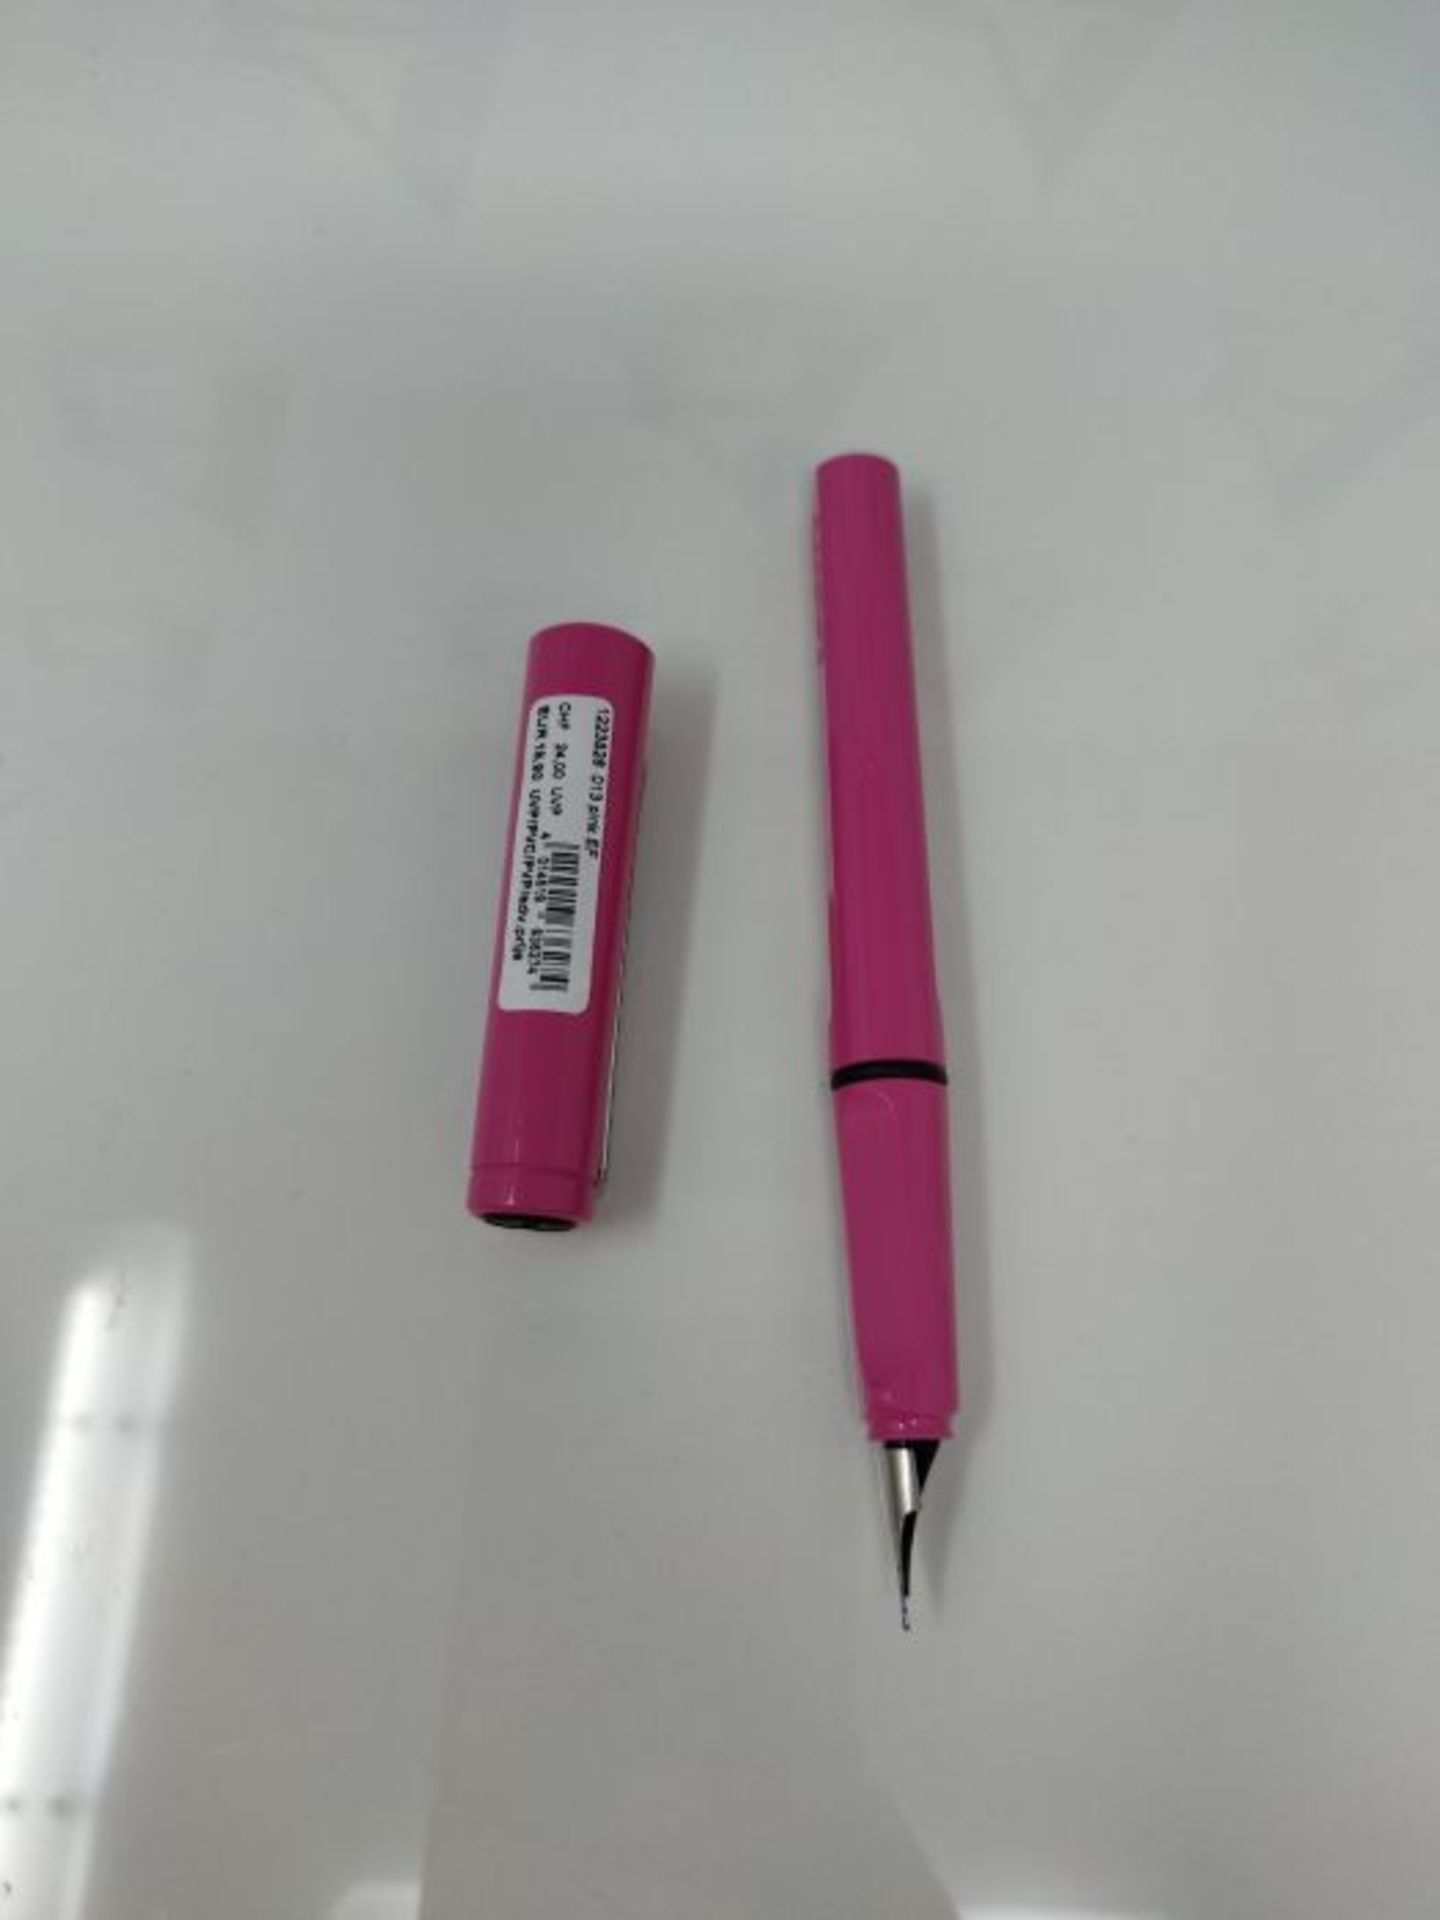 LAMY safari 013 Fountain Pen, Modern Fountain Pen in Pink with Ergonomic Grip and Time - Image 2 of 2